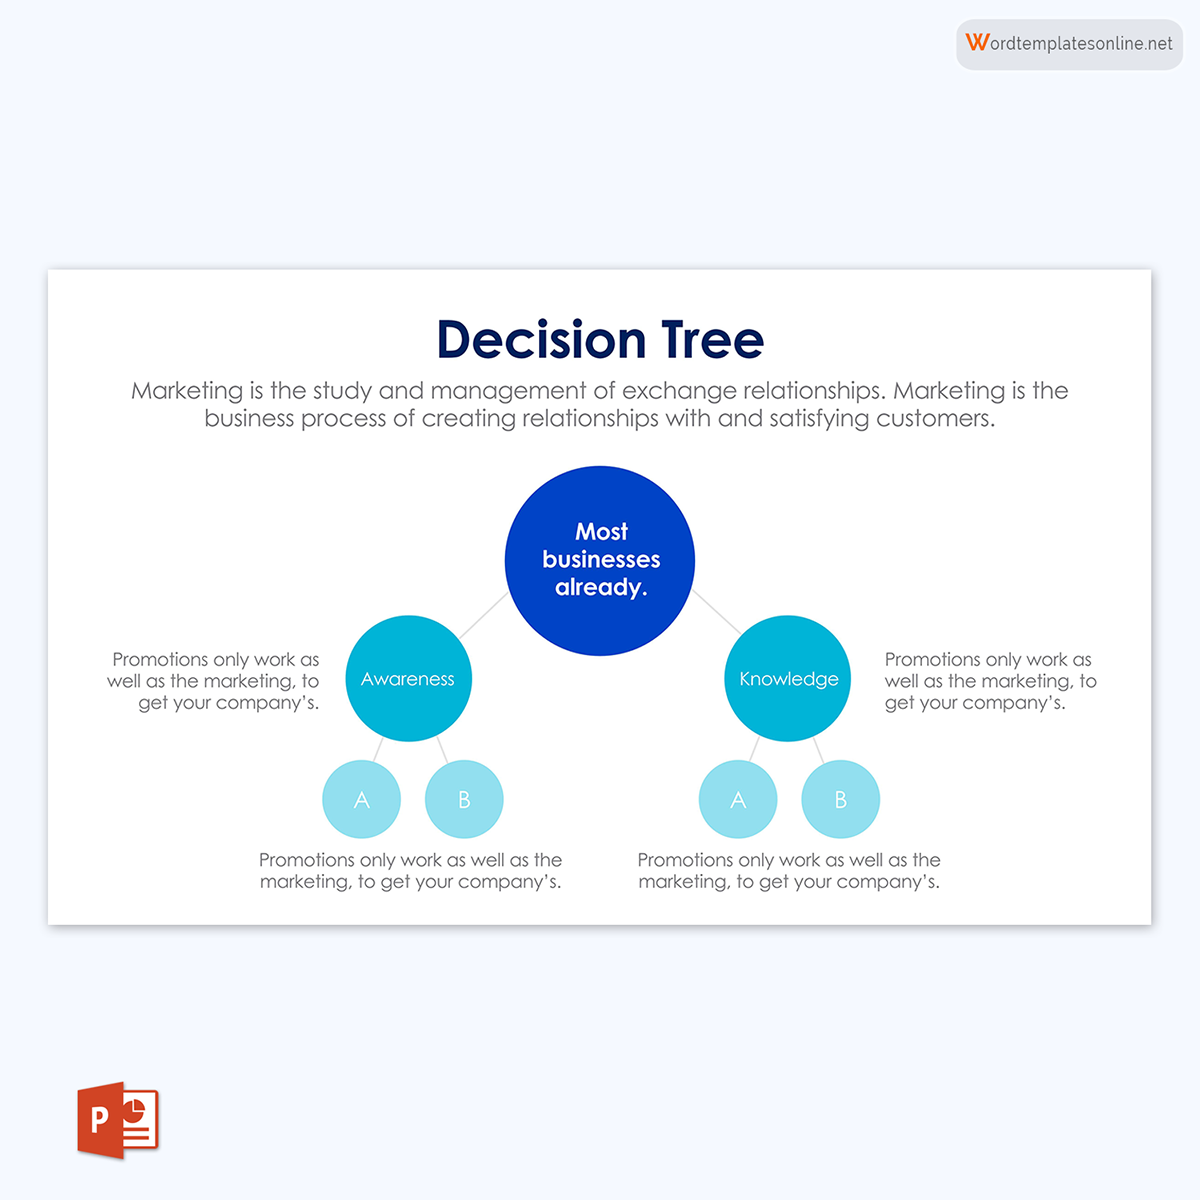 Free Decision Tree Template for PowerPoint 11